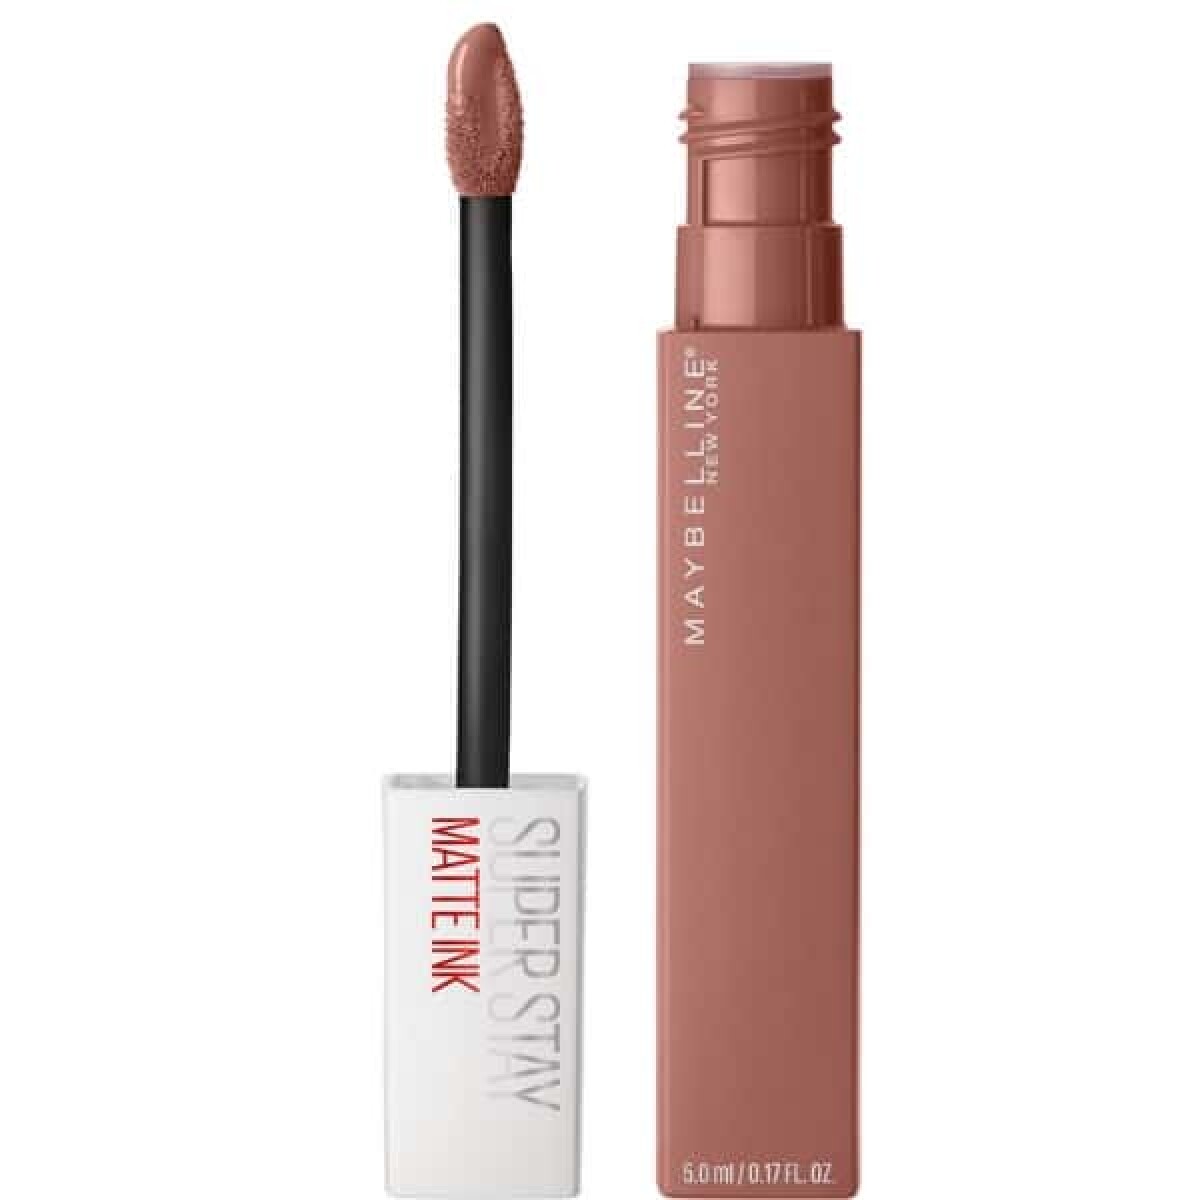 Maybelline Superstay Matte Ink Ext Seductress 